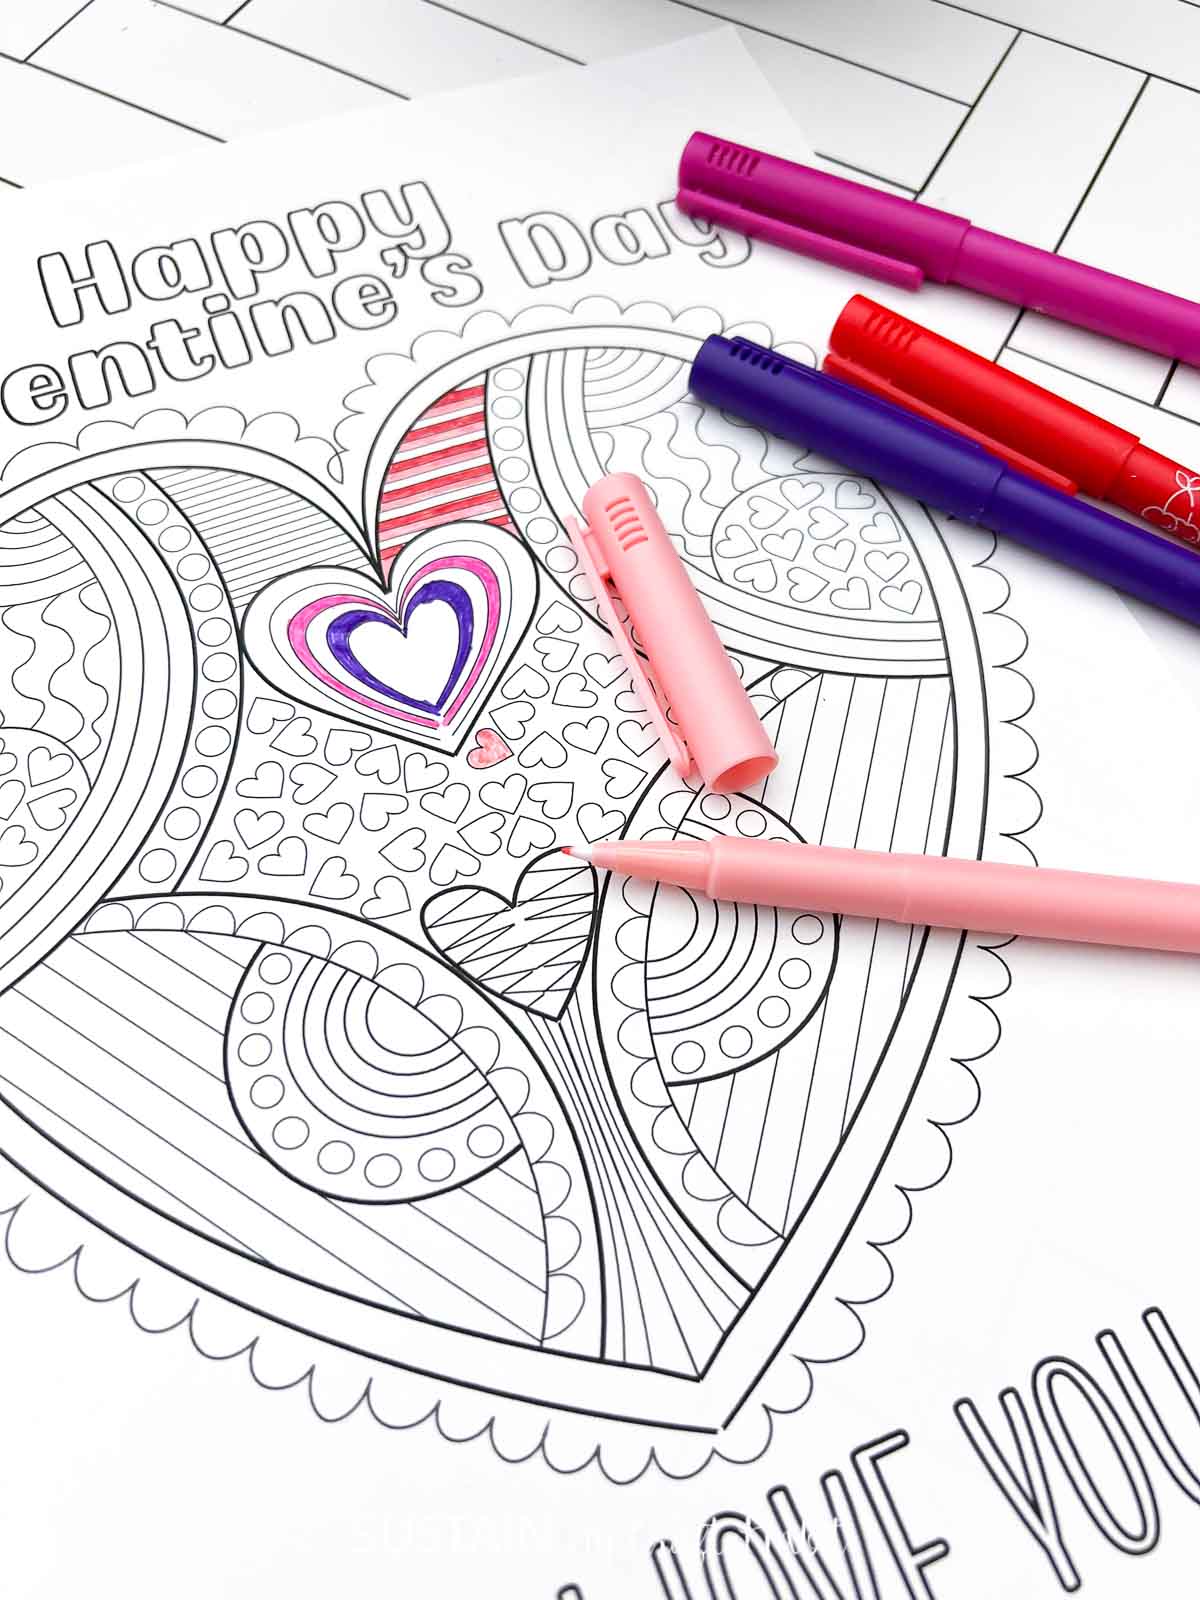 Open pink marker laying on a Valentine's day heart coloring page.